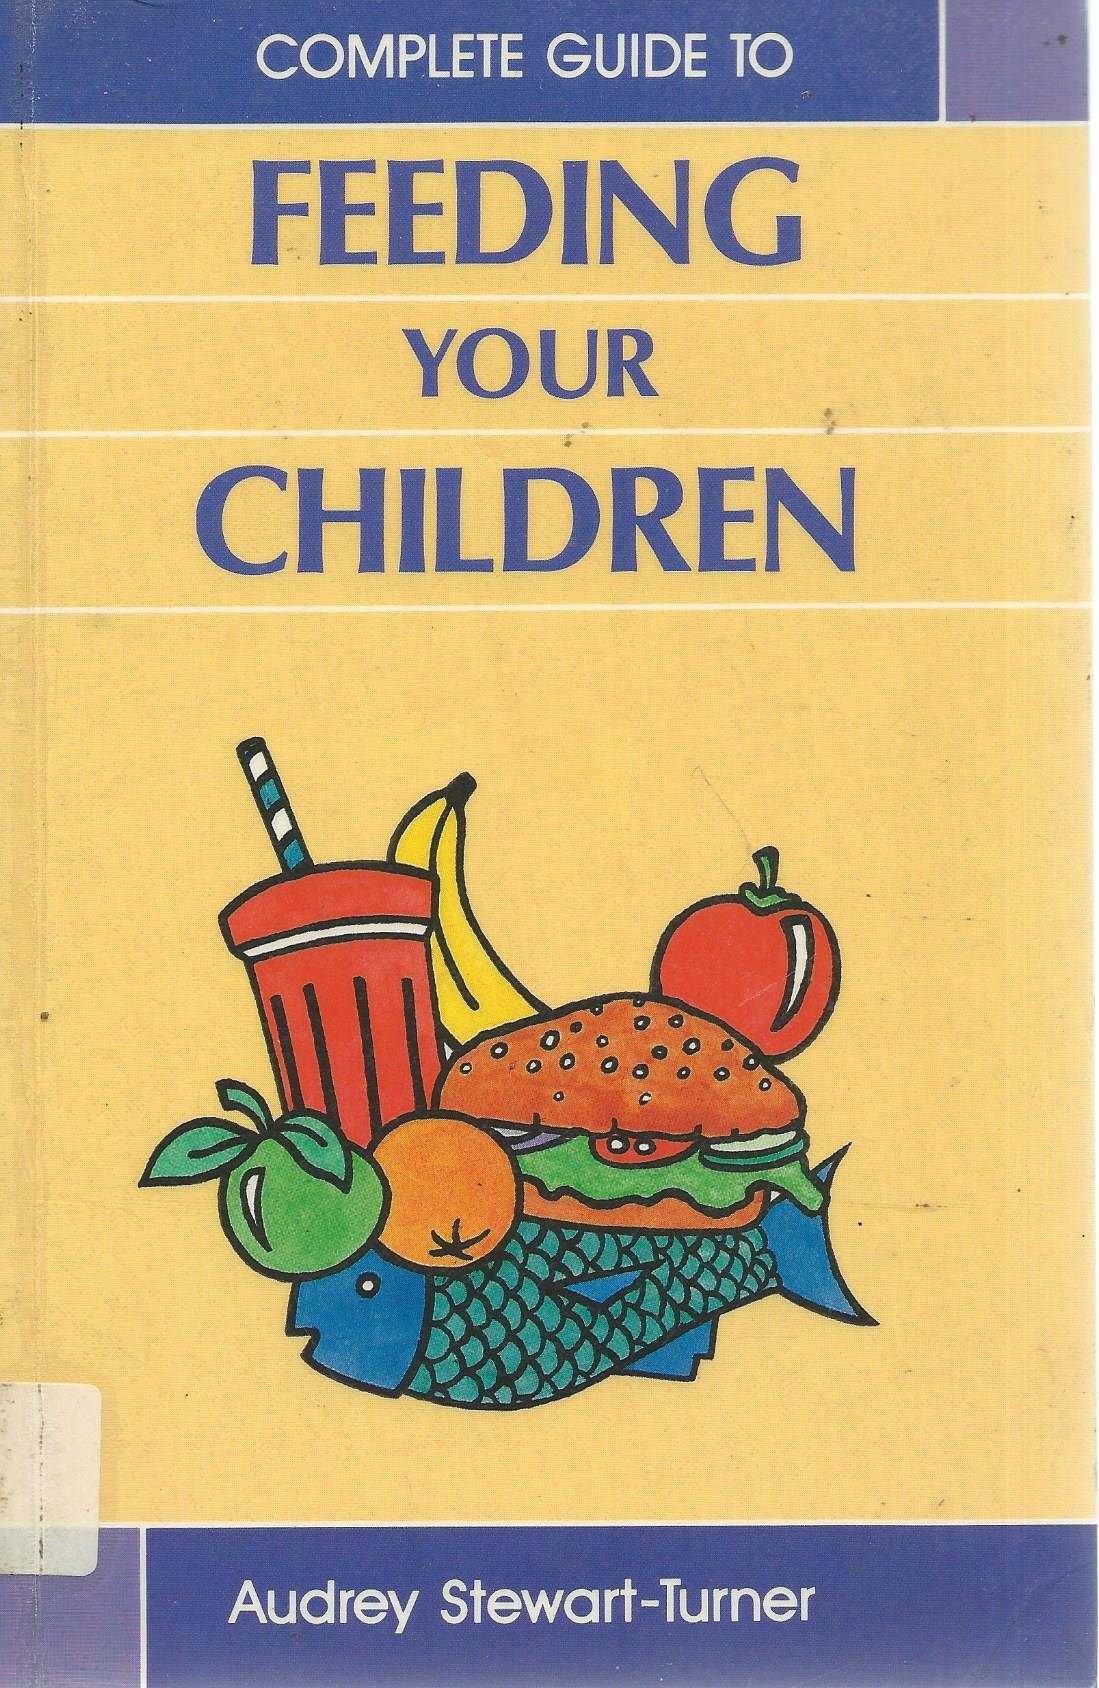 Complete guide to feeding your children magazine reviews